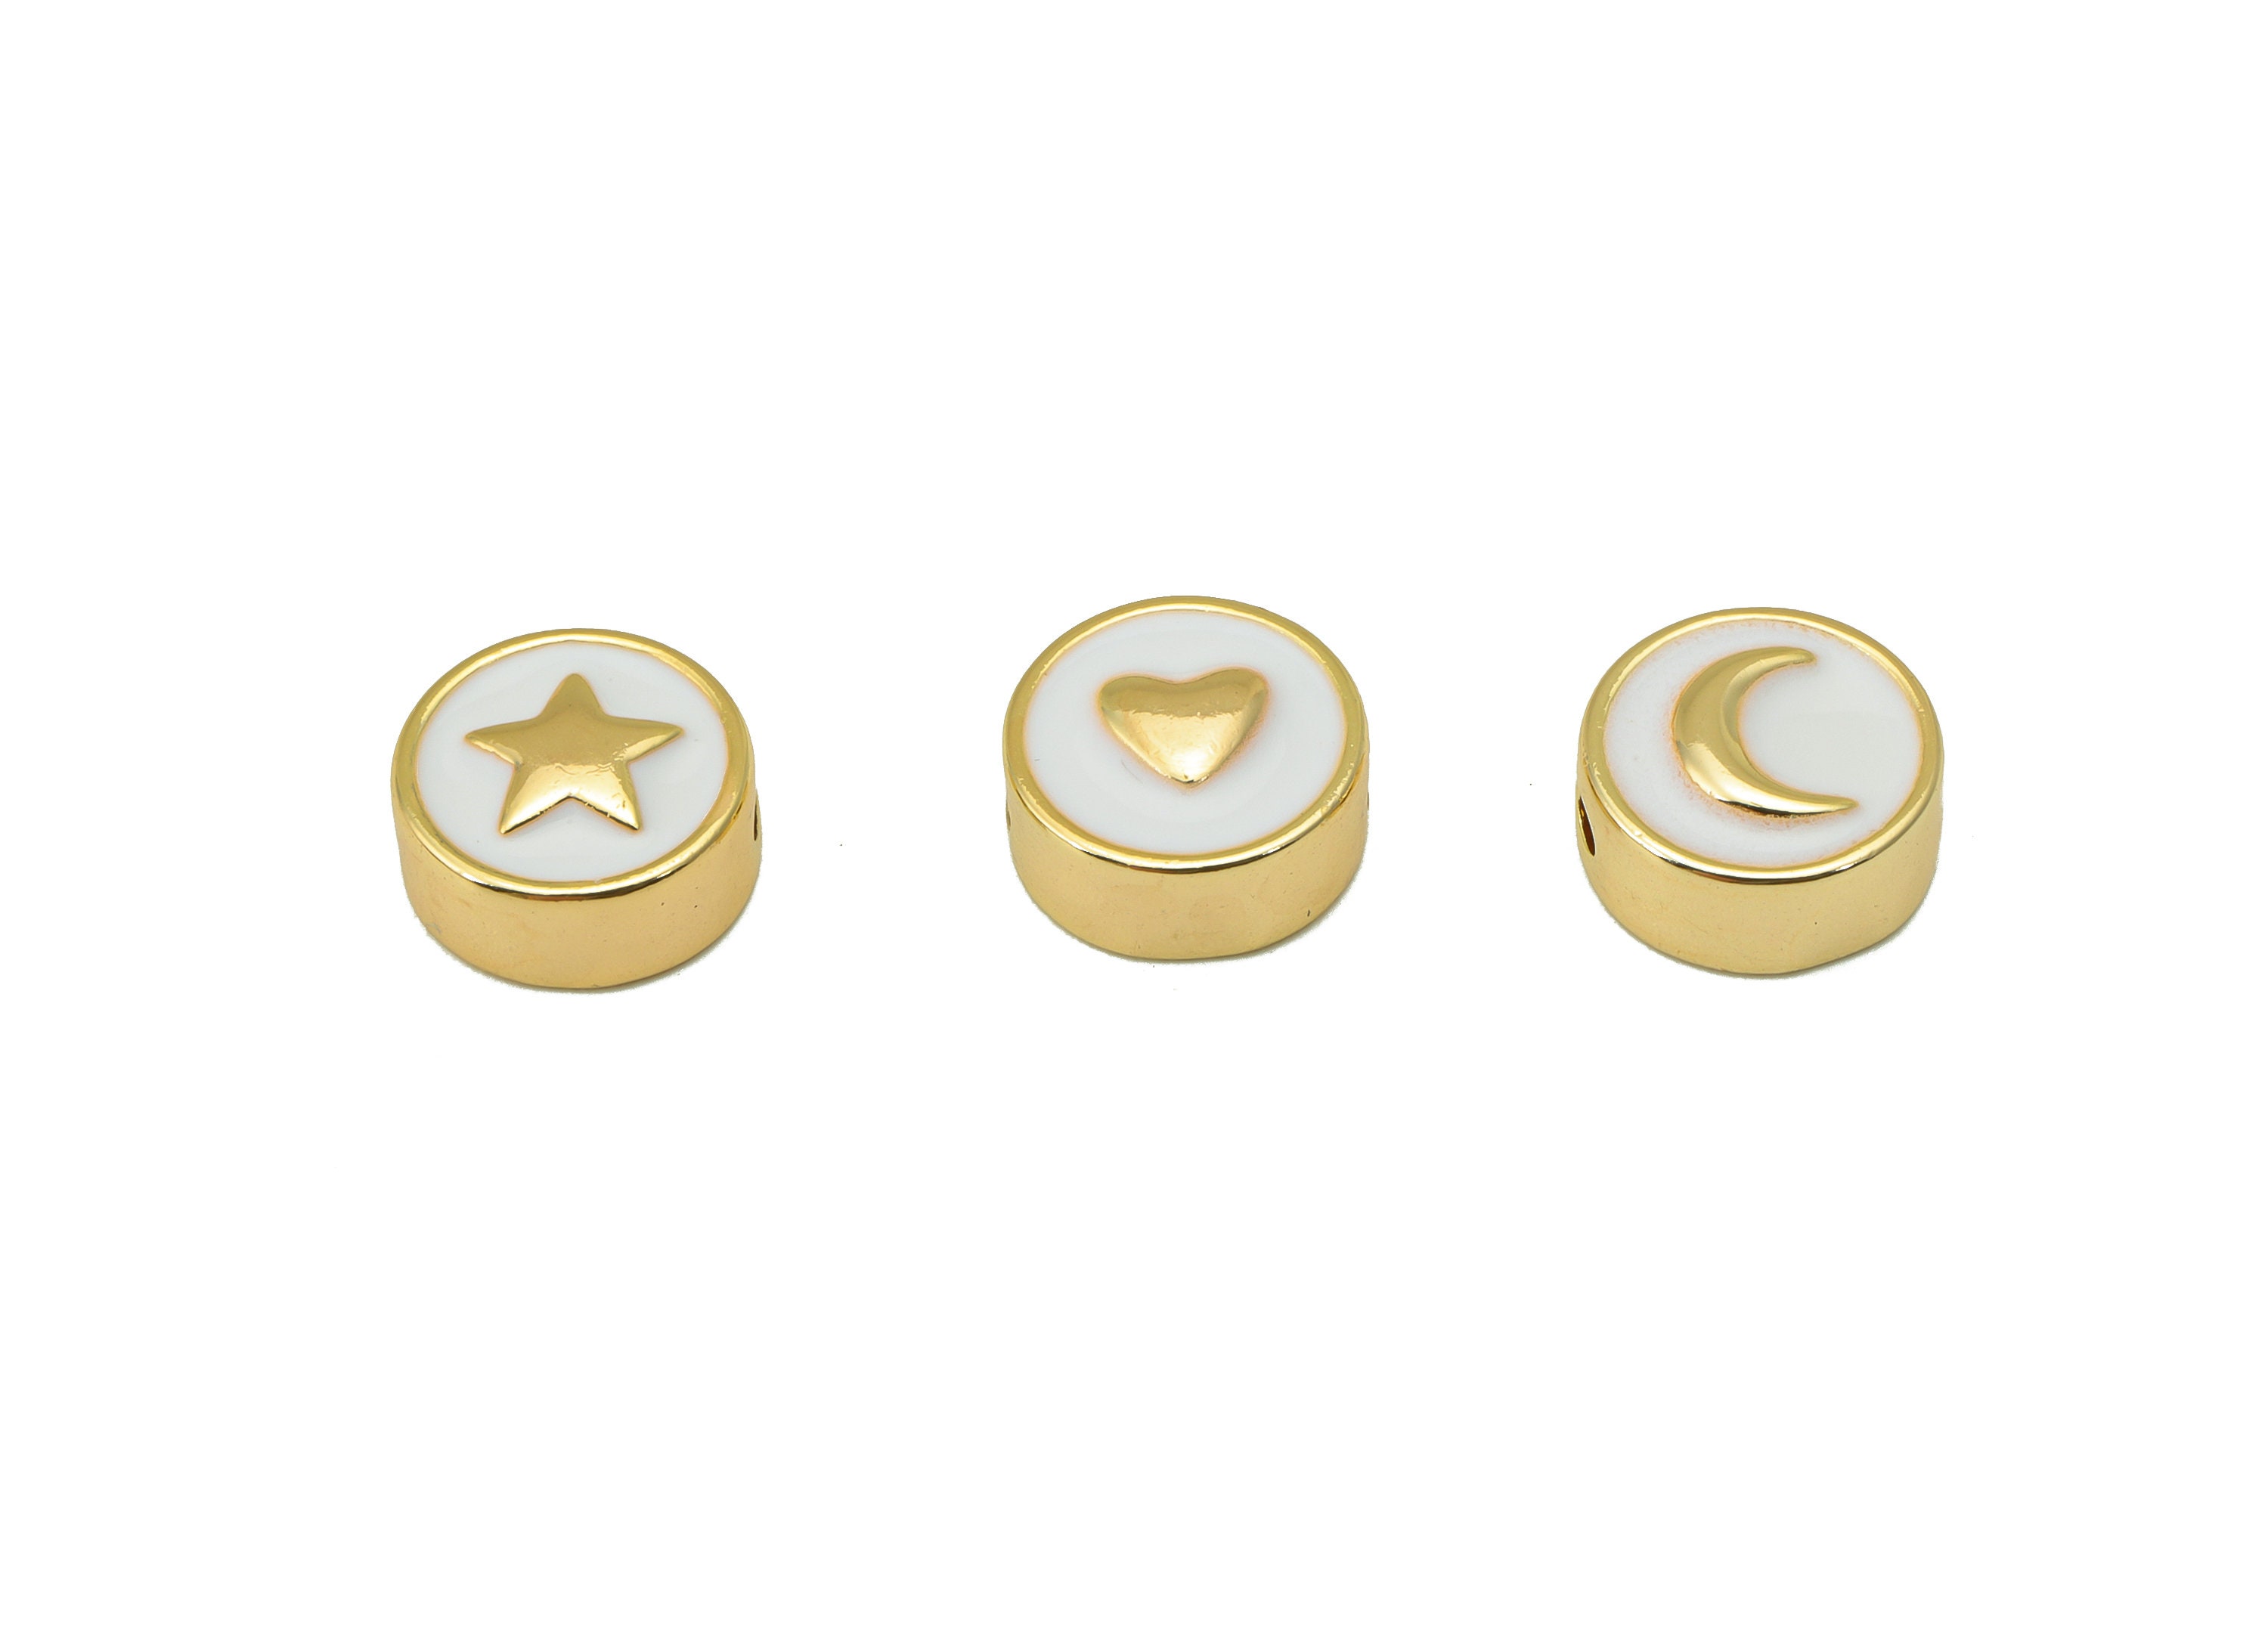 Gold Insert Ring Spacer Beads, 20 pcs Saturn Jump Ring For Beads